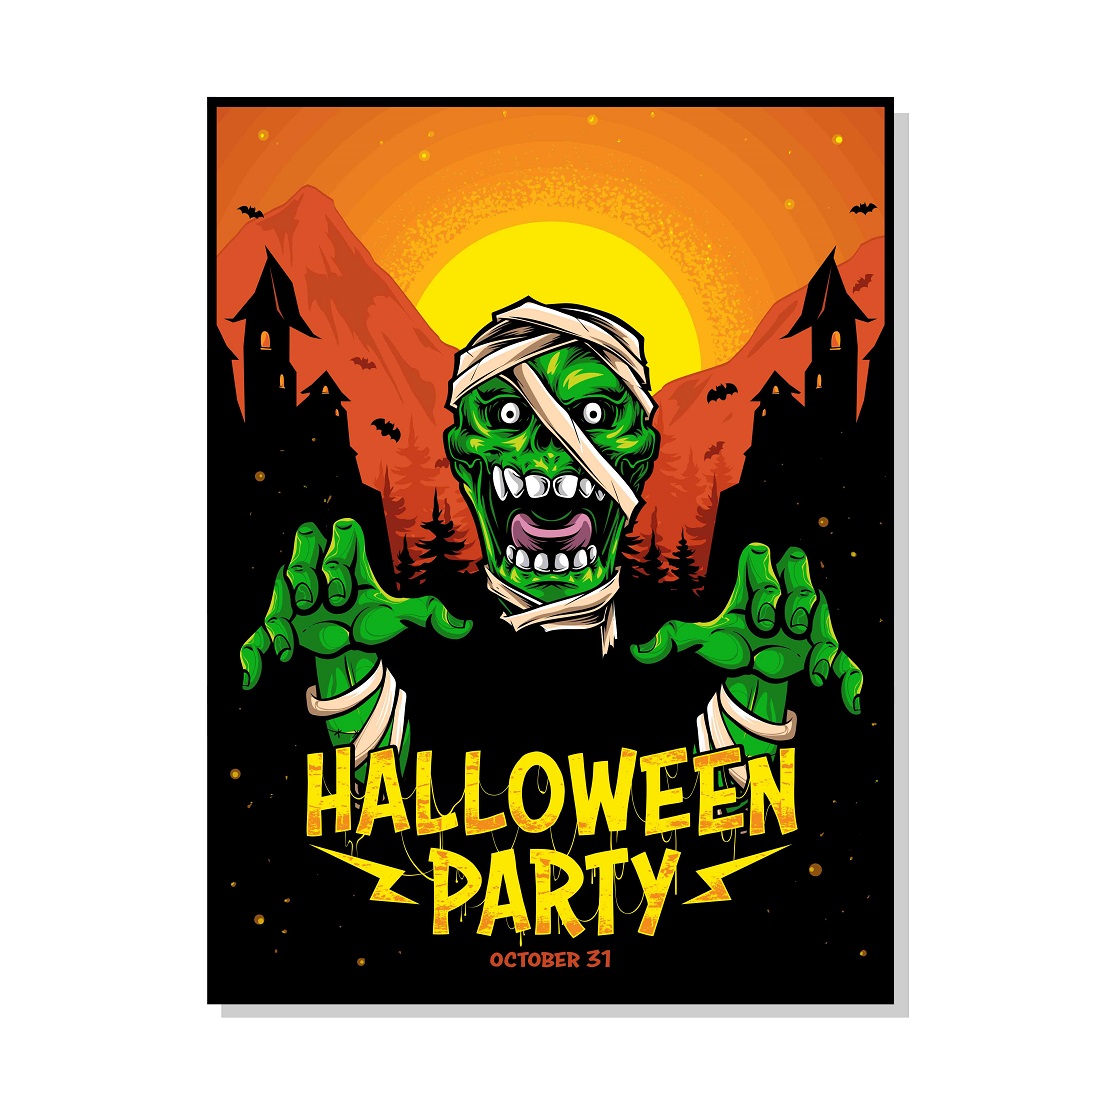 Halloween poster with mummy character preview image.